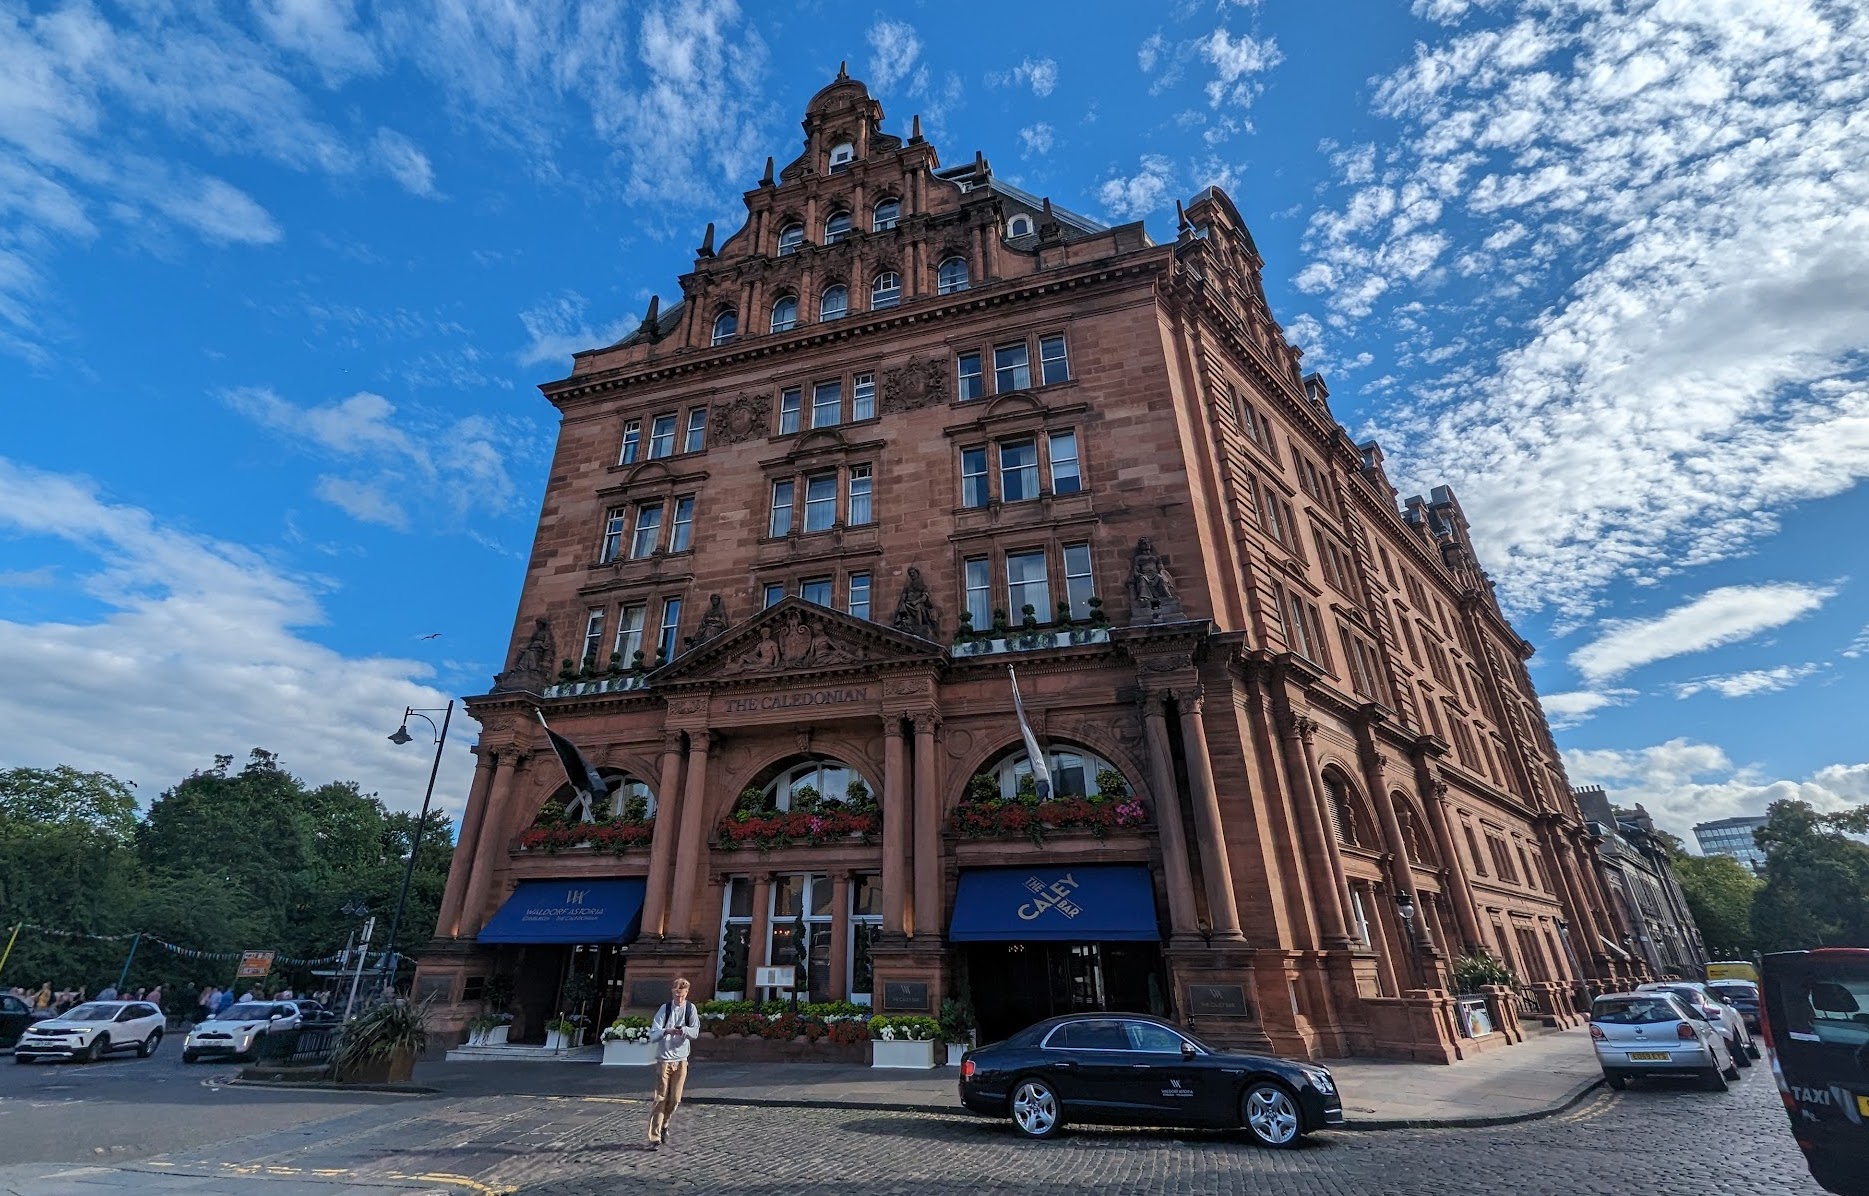 Hotels lead Q2 rise in Scottish commercial property investments to £320m